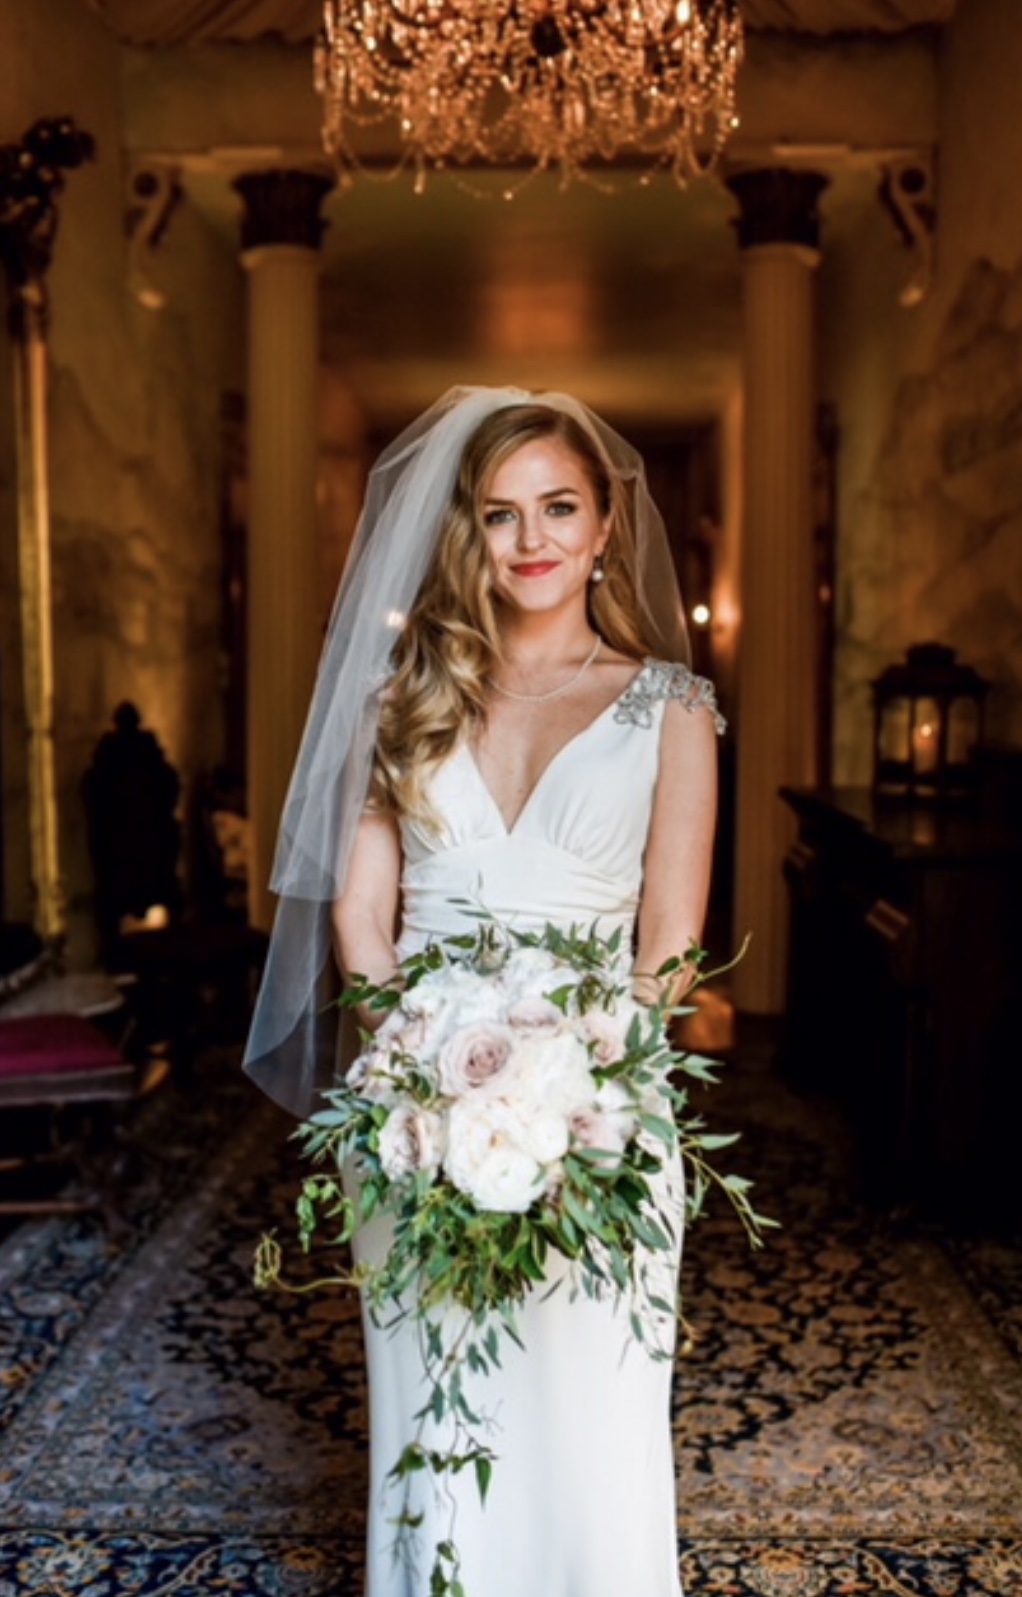 Bride with deep vintage waves, side part, red lipstick, bouquet and veil smiling at the camera